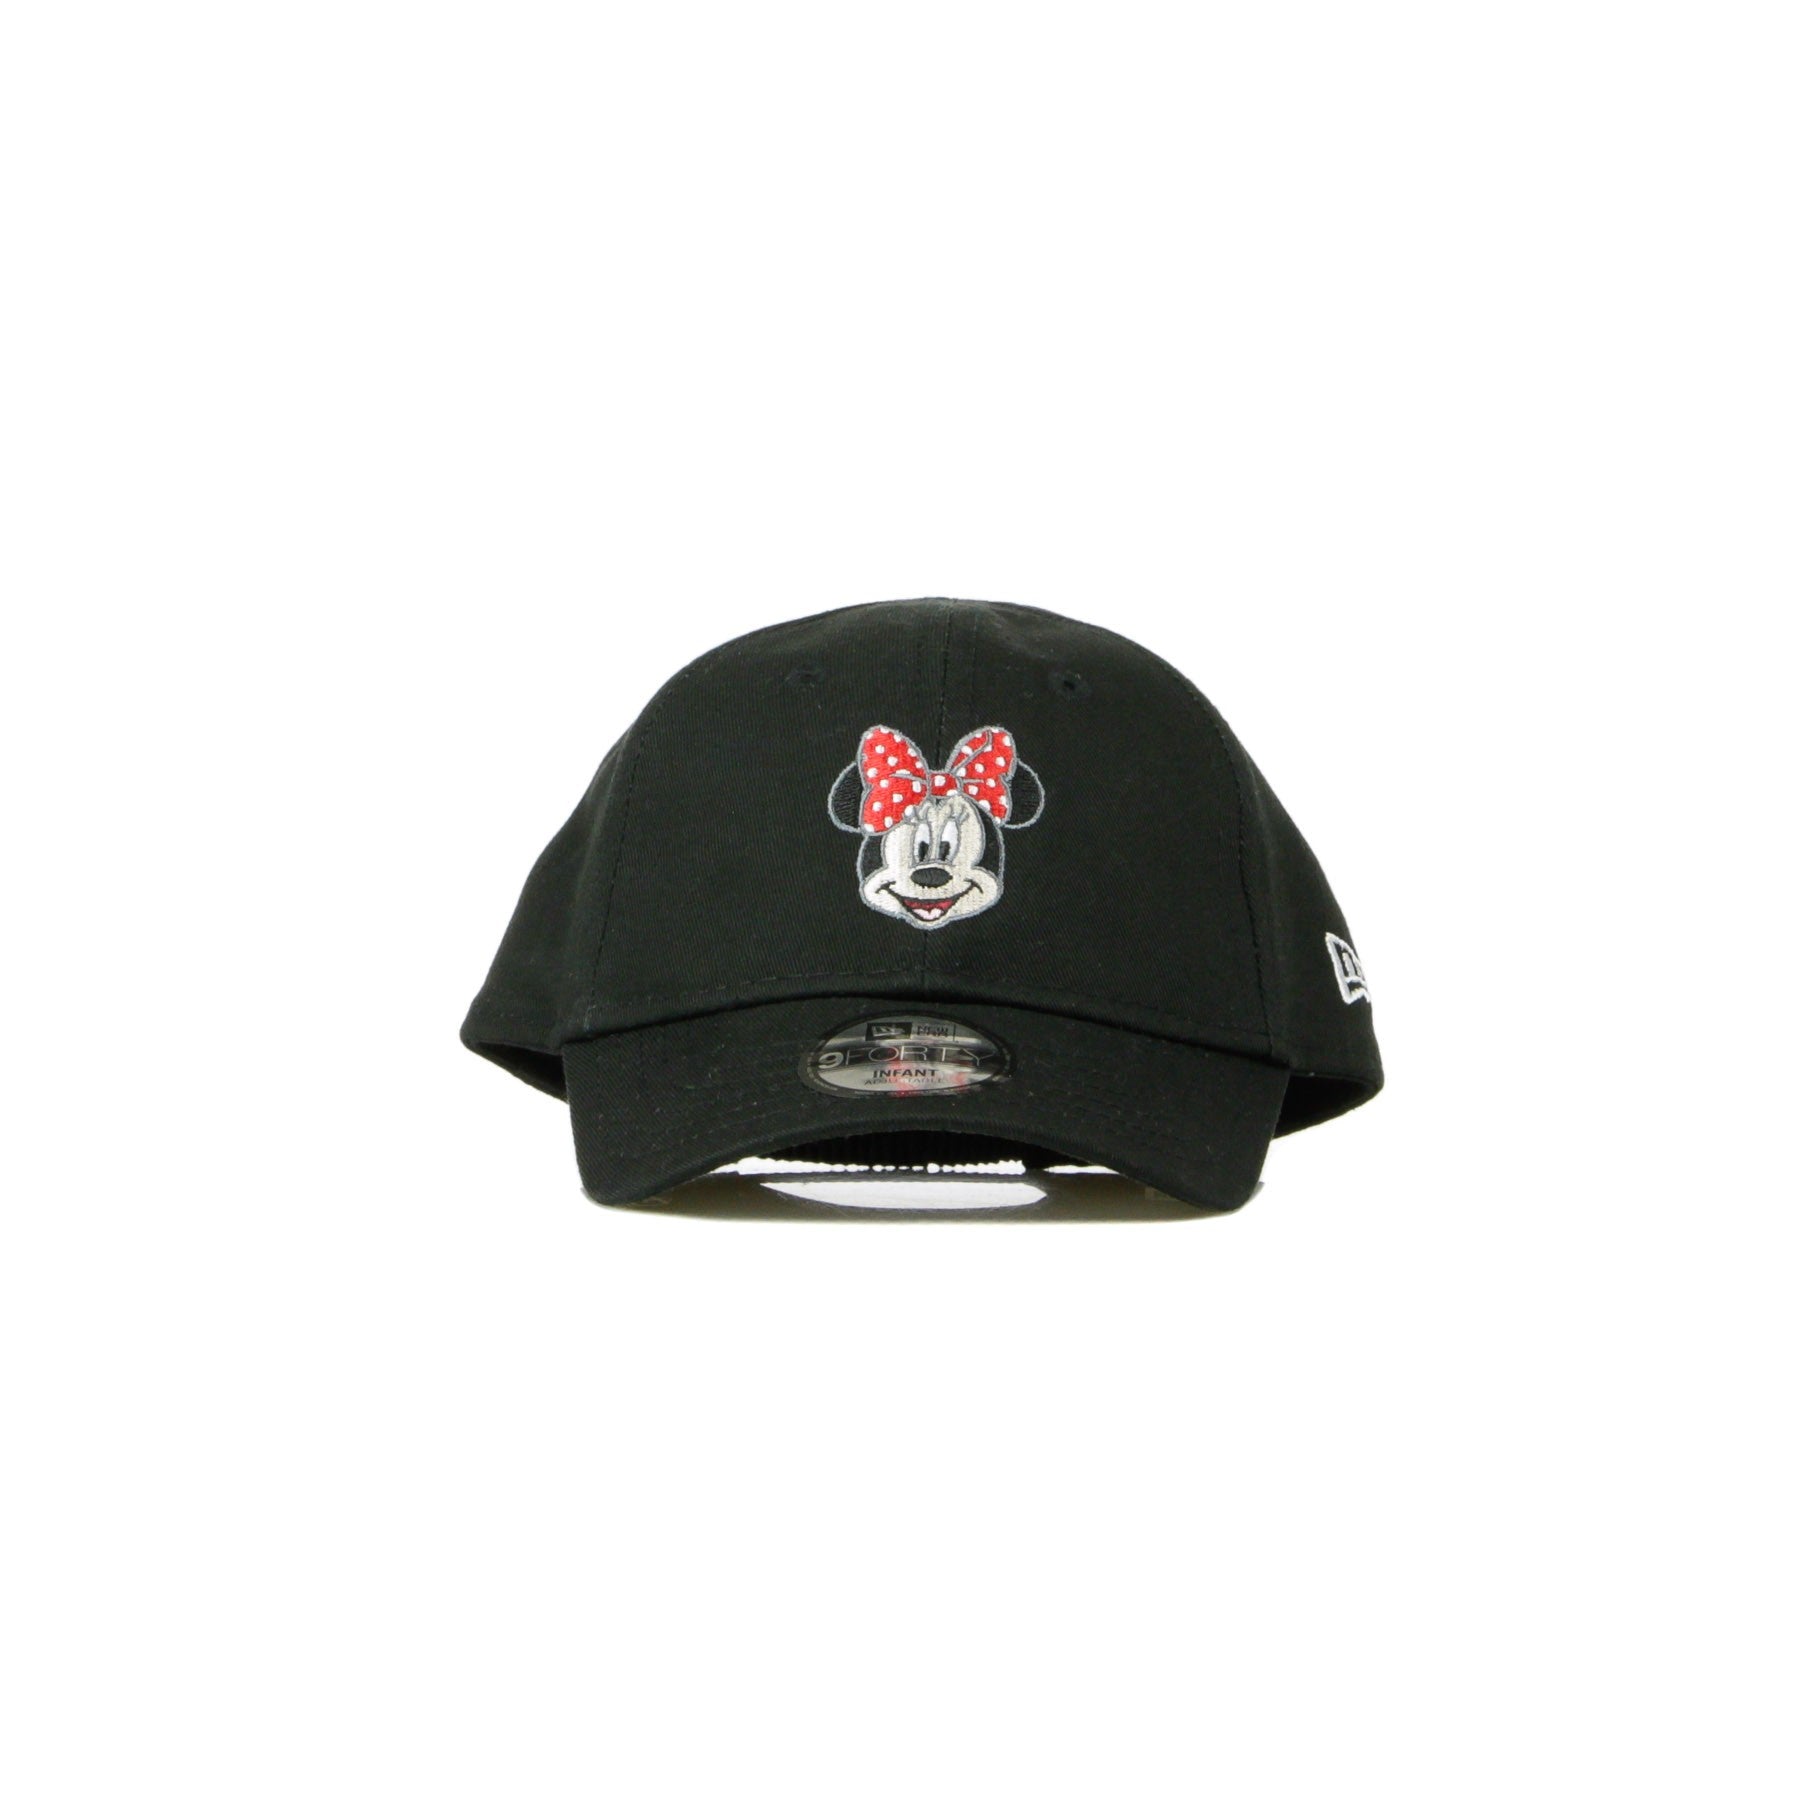 Curved Visor Cap for Children and Infants Disney Character Face 940 Minnie Mouse Black